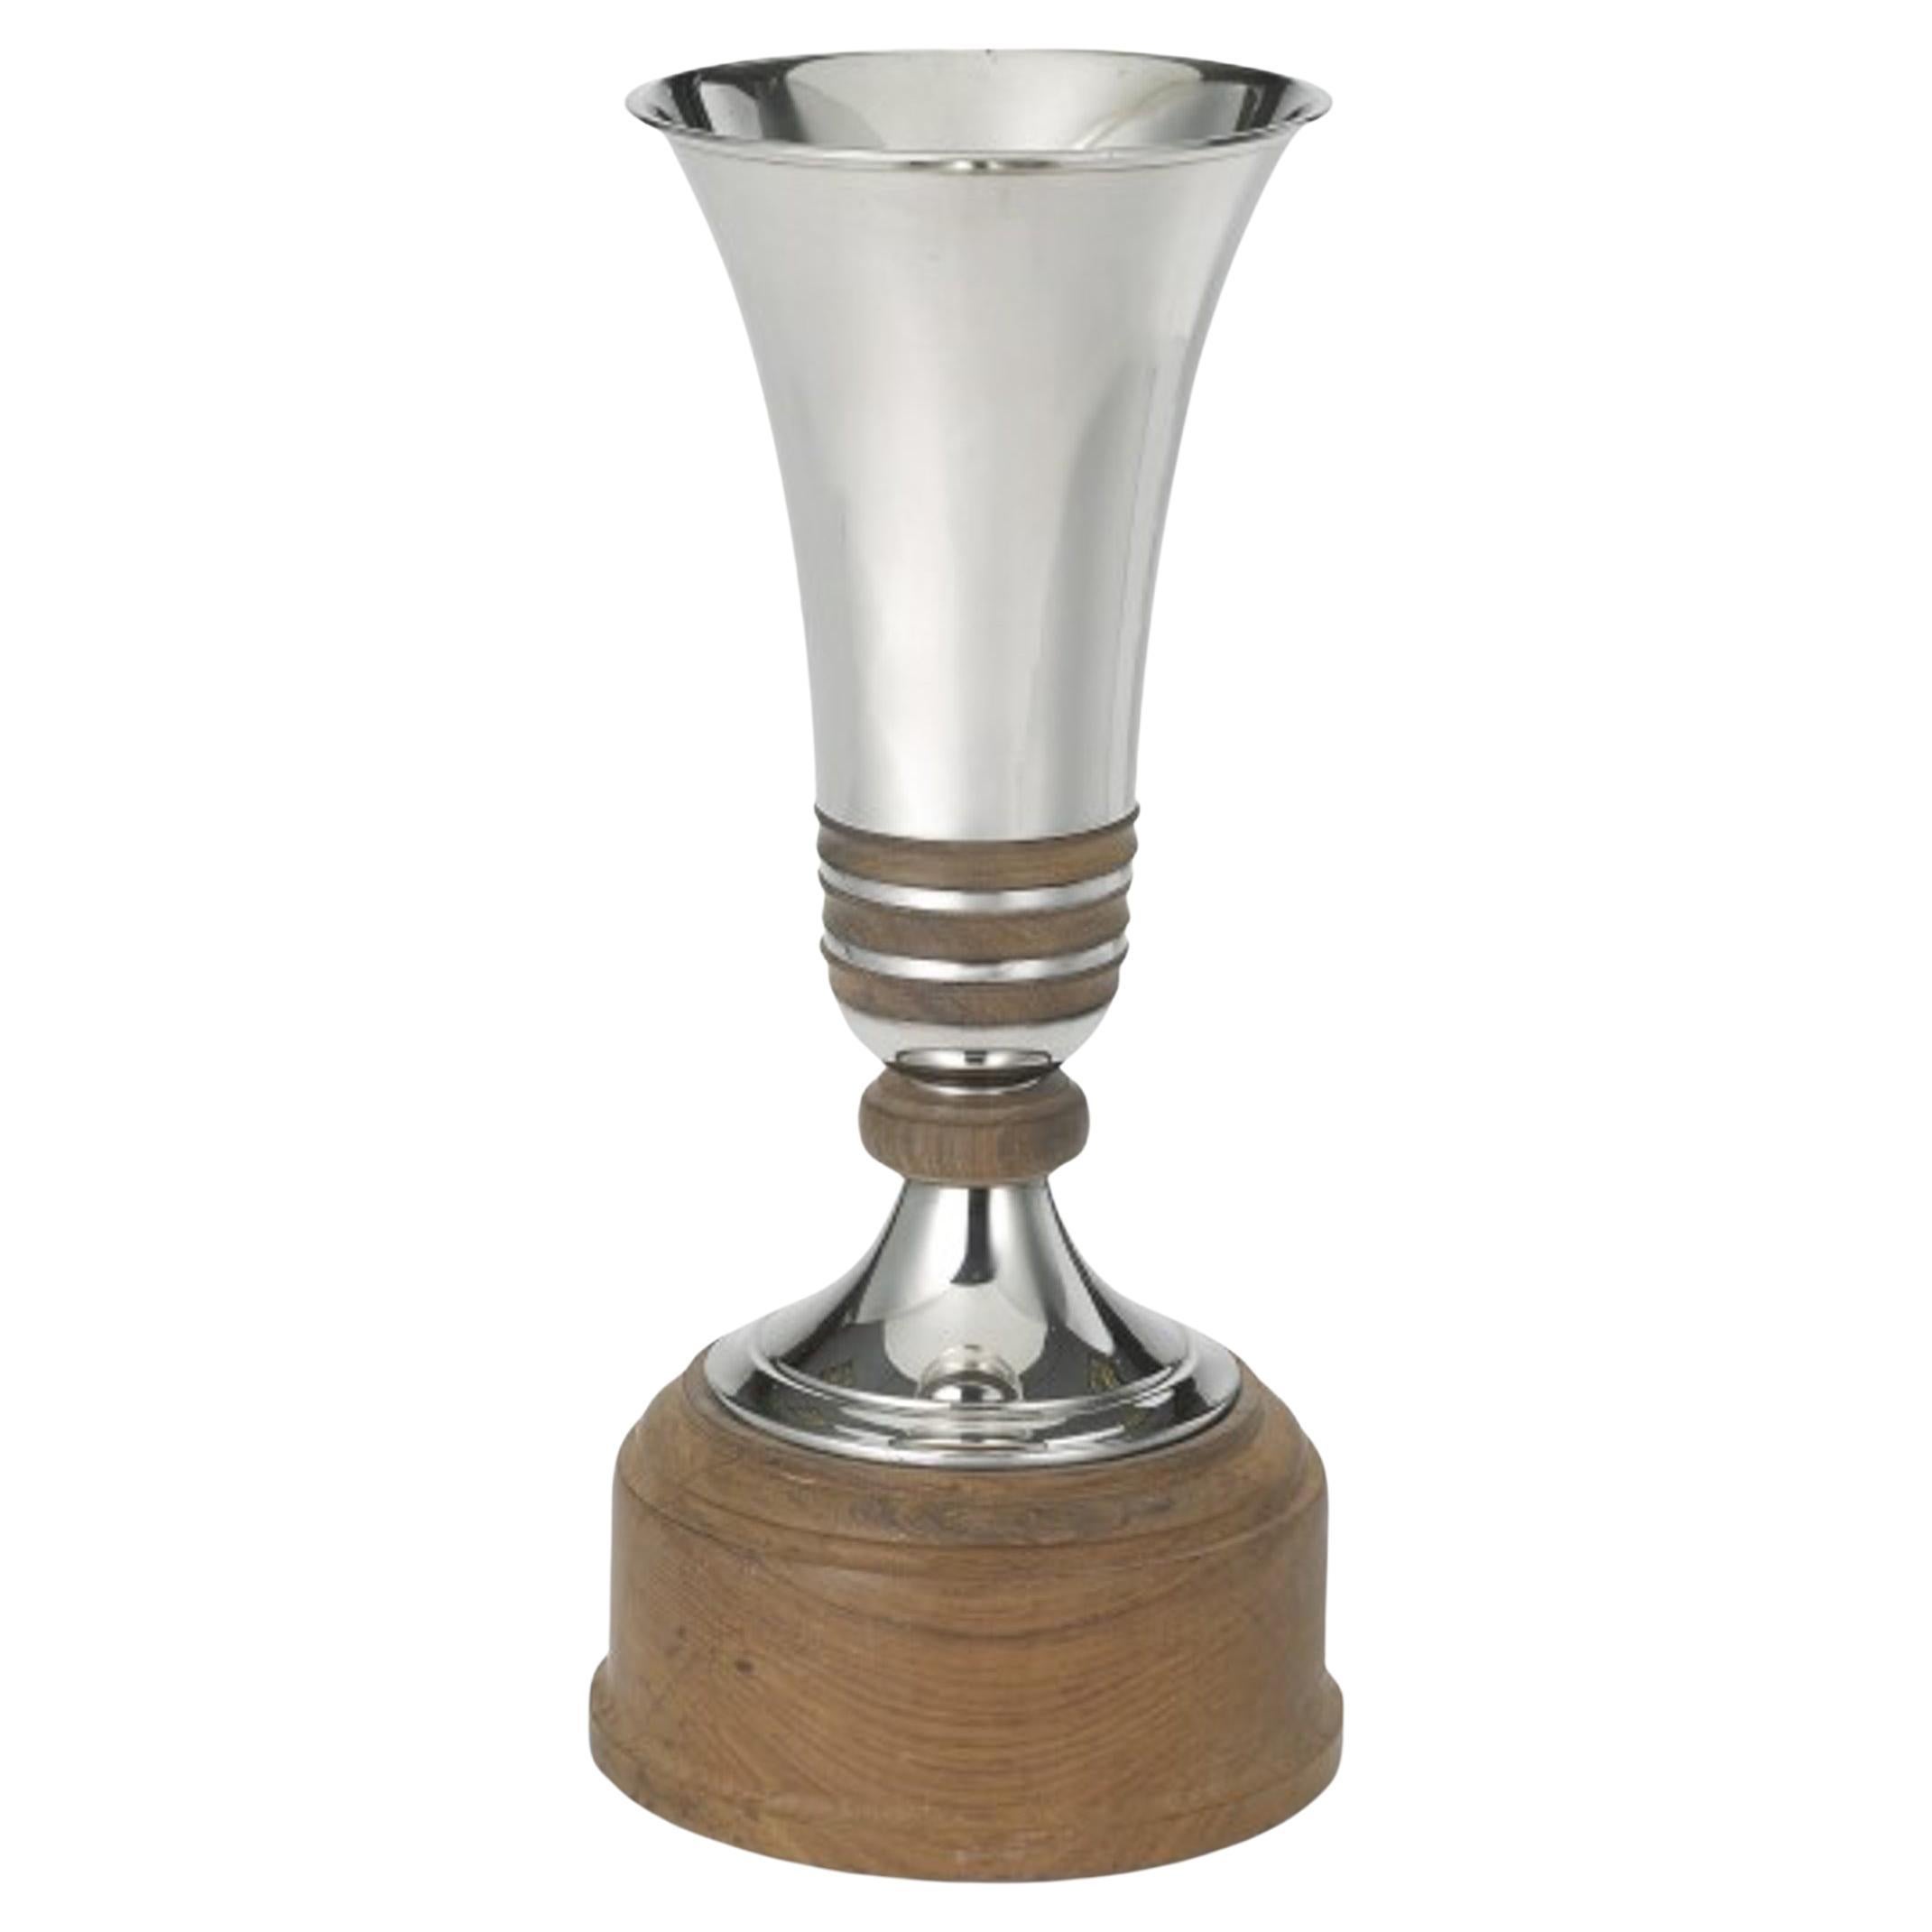 Belgian Sterling Silver Vase on Wood Stand, by Brussels Wolfers, circa 1950